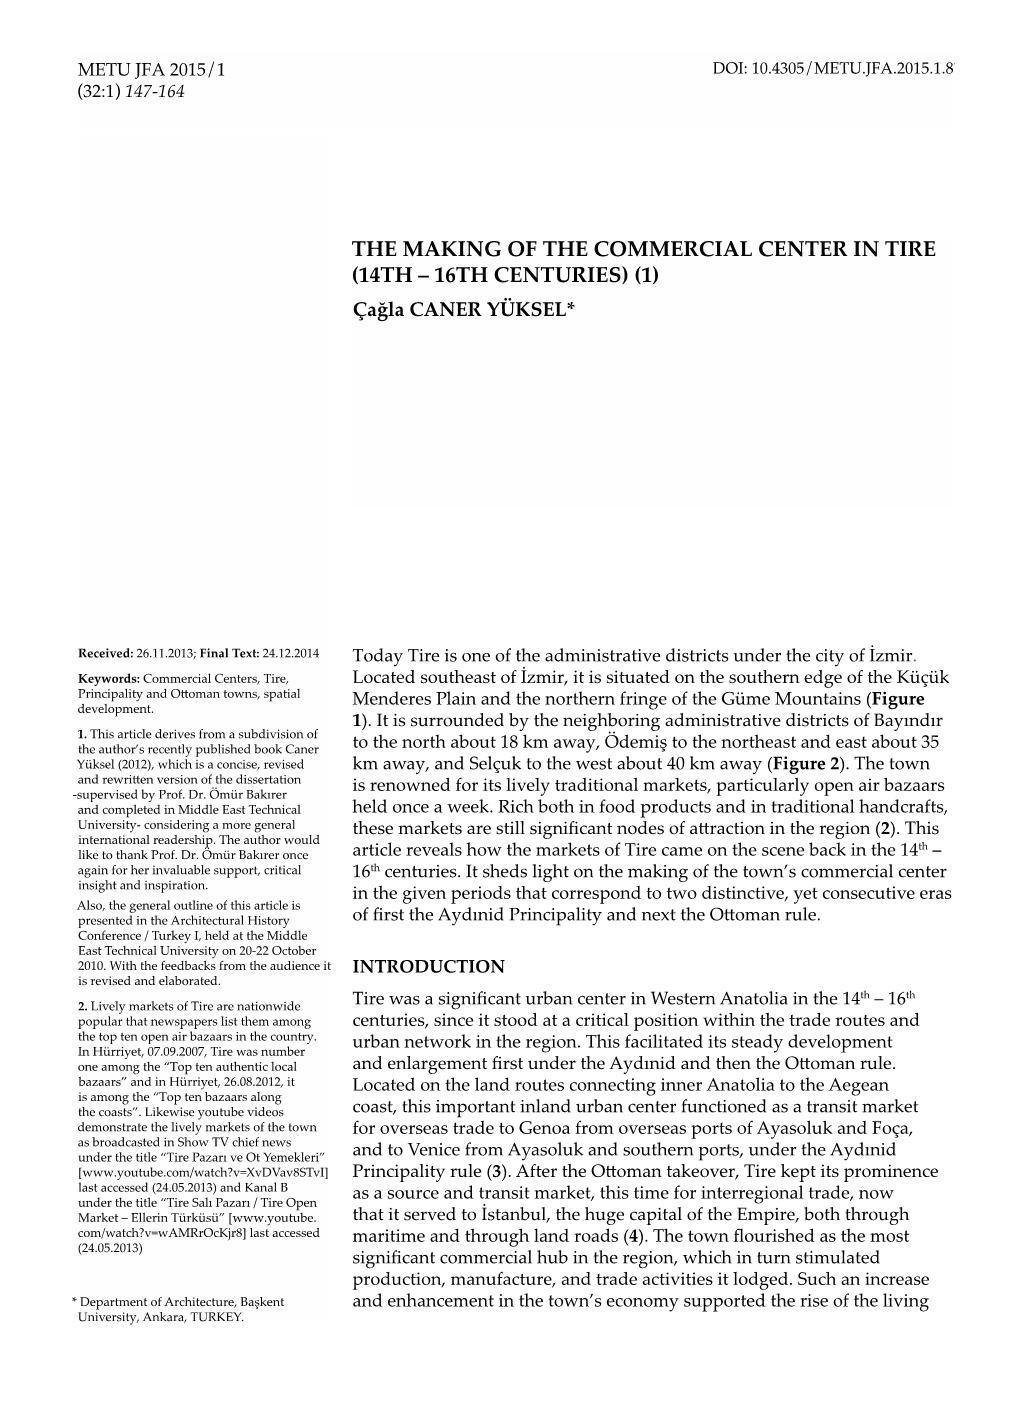 THE MAKING of the COMMERCIAL CENTER in TIRE (14TH – 16TH CENTURIES) (1) Çağla CANER YÜKSEL*